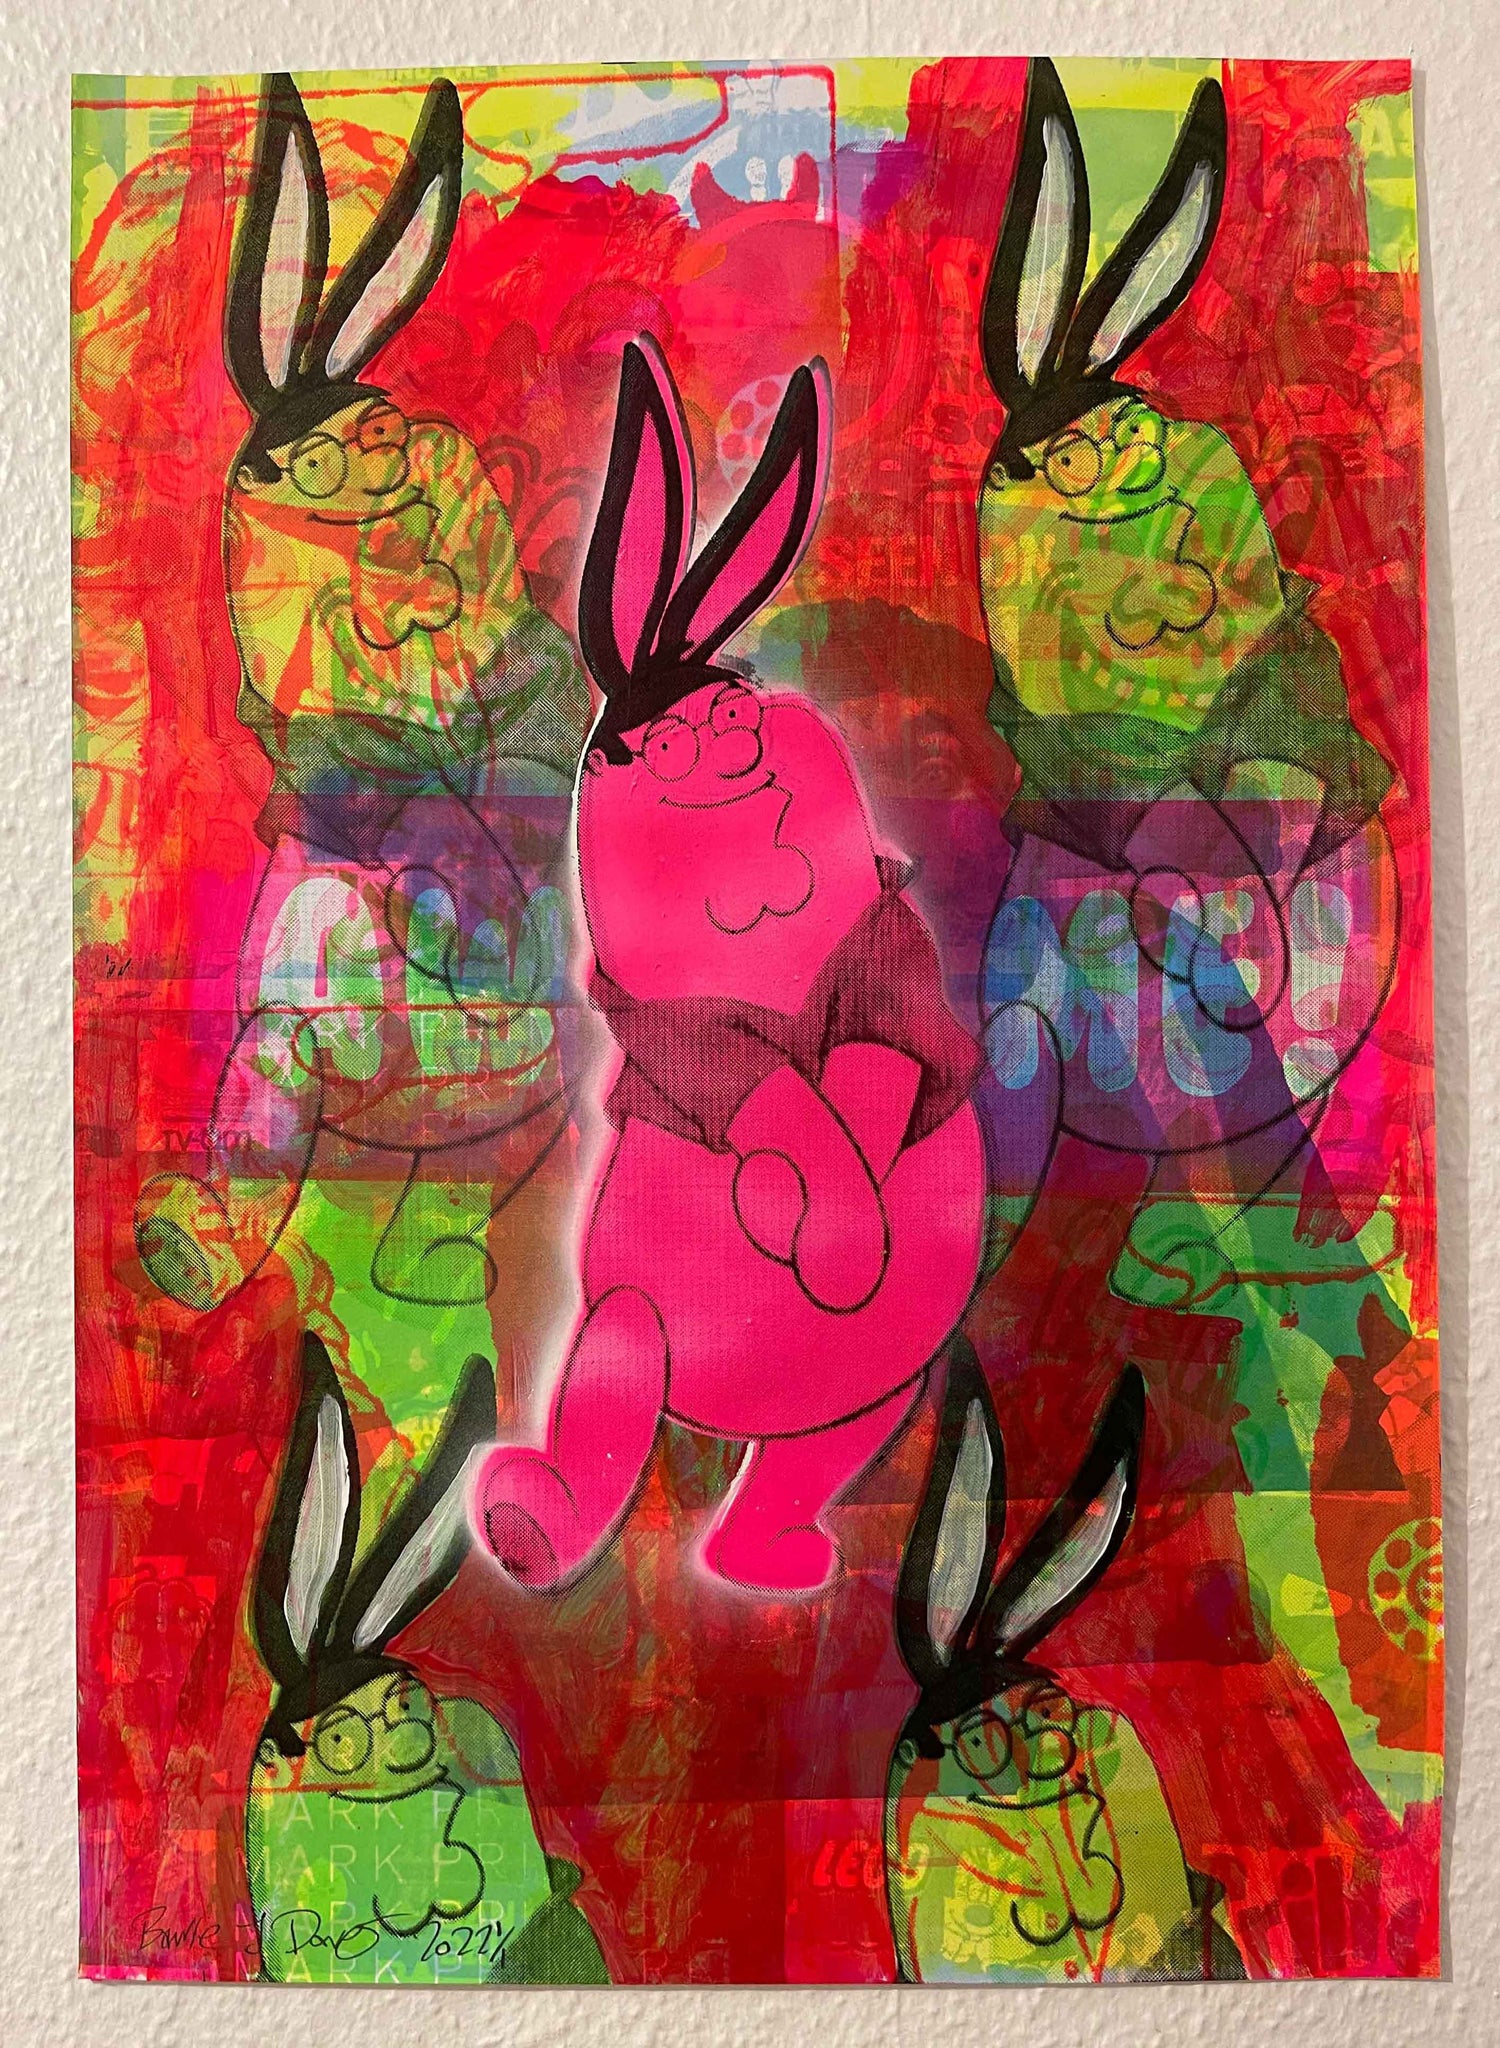 Winnie griffin mash up print by Barrie J Davies 2022 - unframed Silkscreen print on paper (hand finished) edition of 1/1 - A2 size 42cm x 59.4cm.  